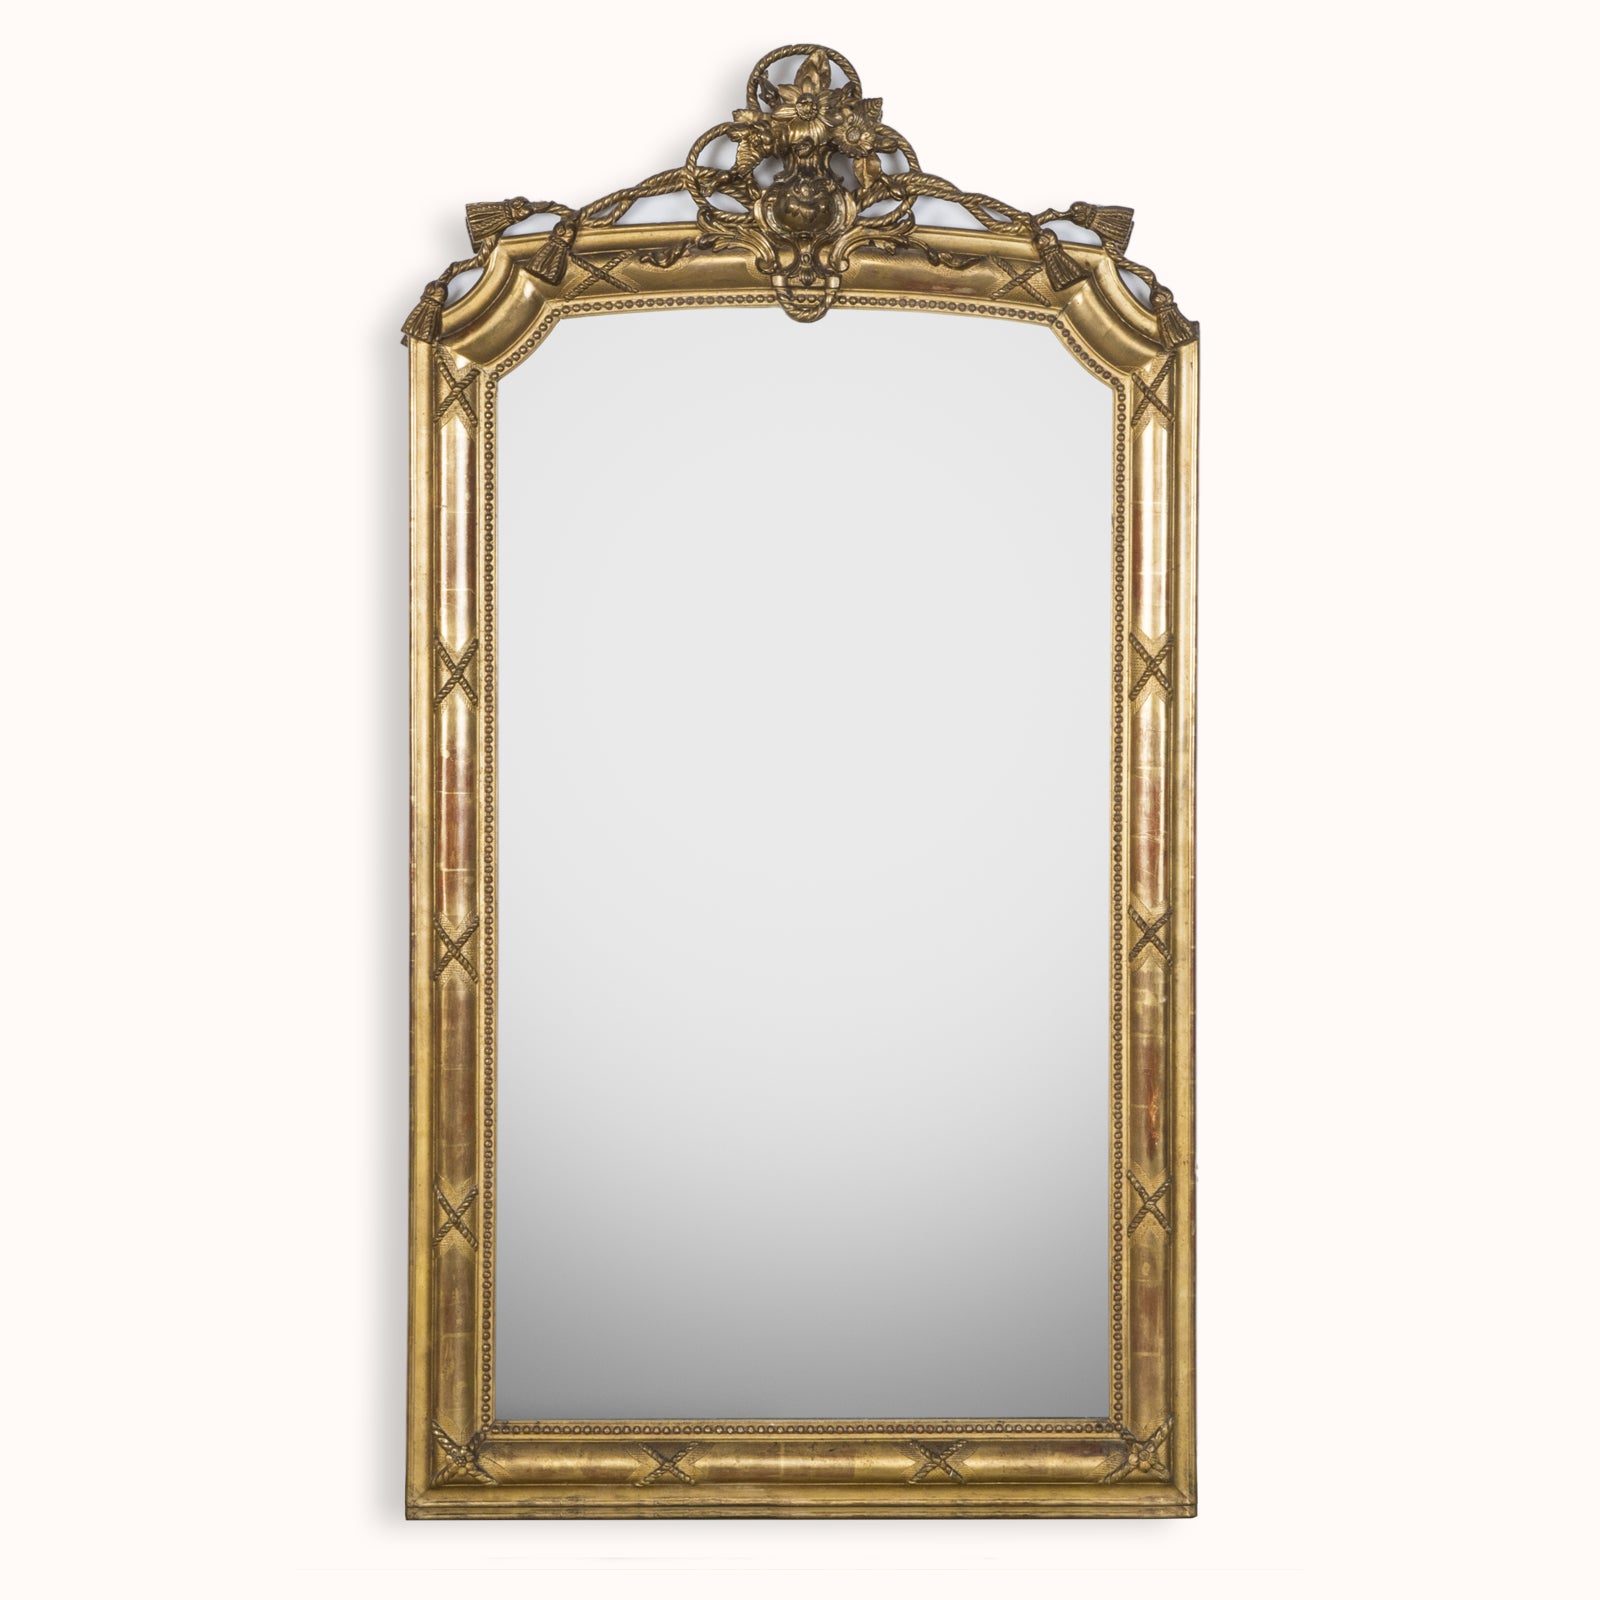 Neo-Classical Style Giltwood Rope and Tassel Motif Mirror